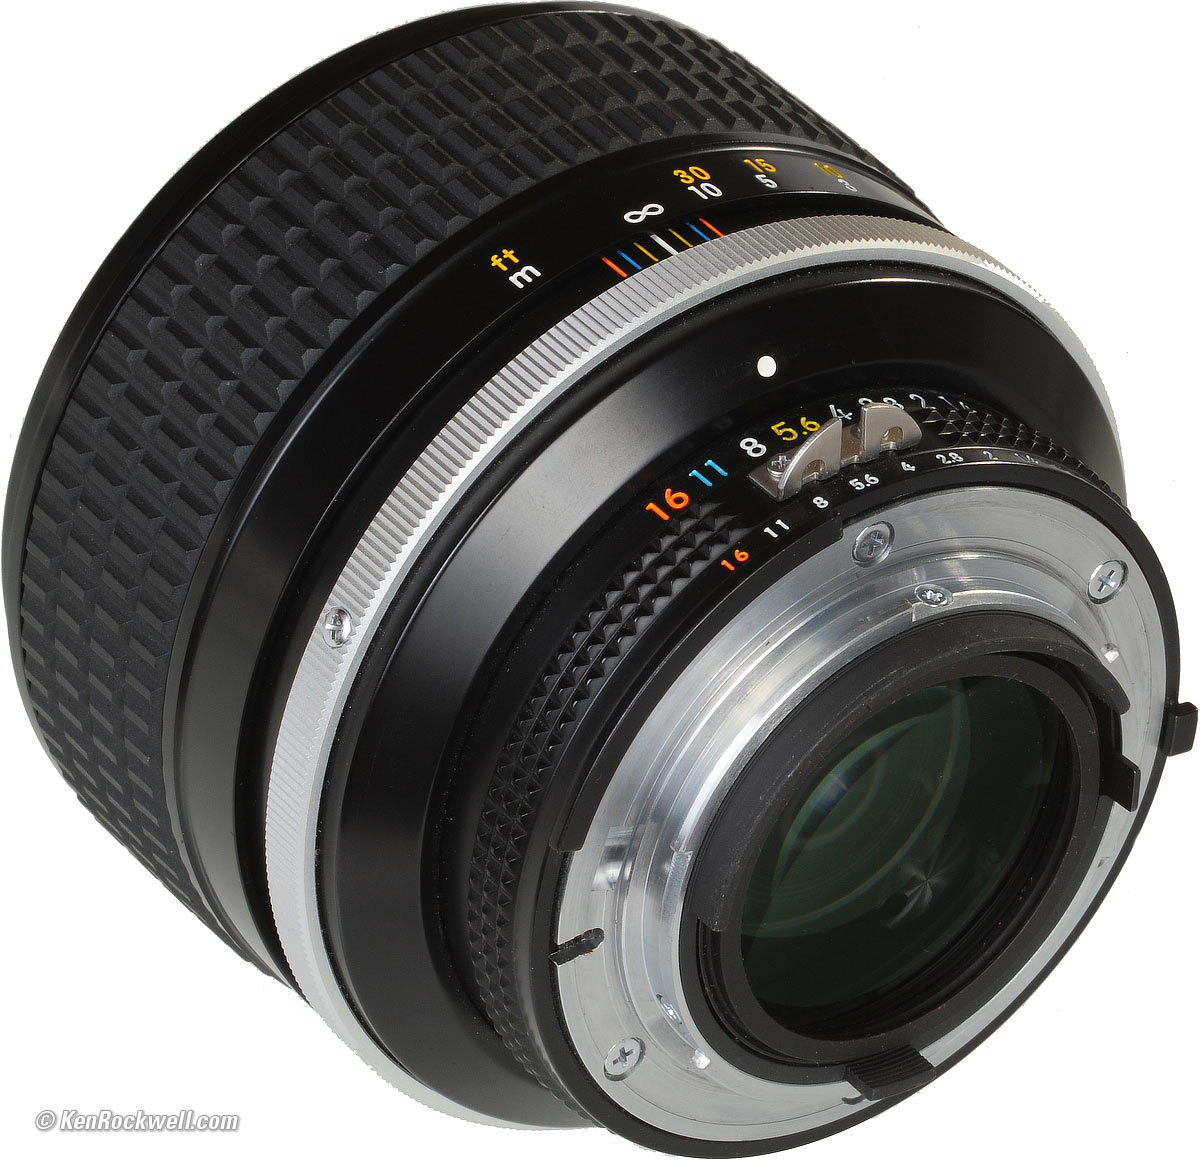 Nikon 85mm f/1.4 AI-s Review & Sample Image Files by Ken Rockwell